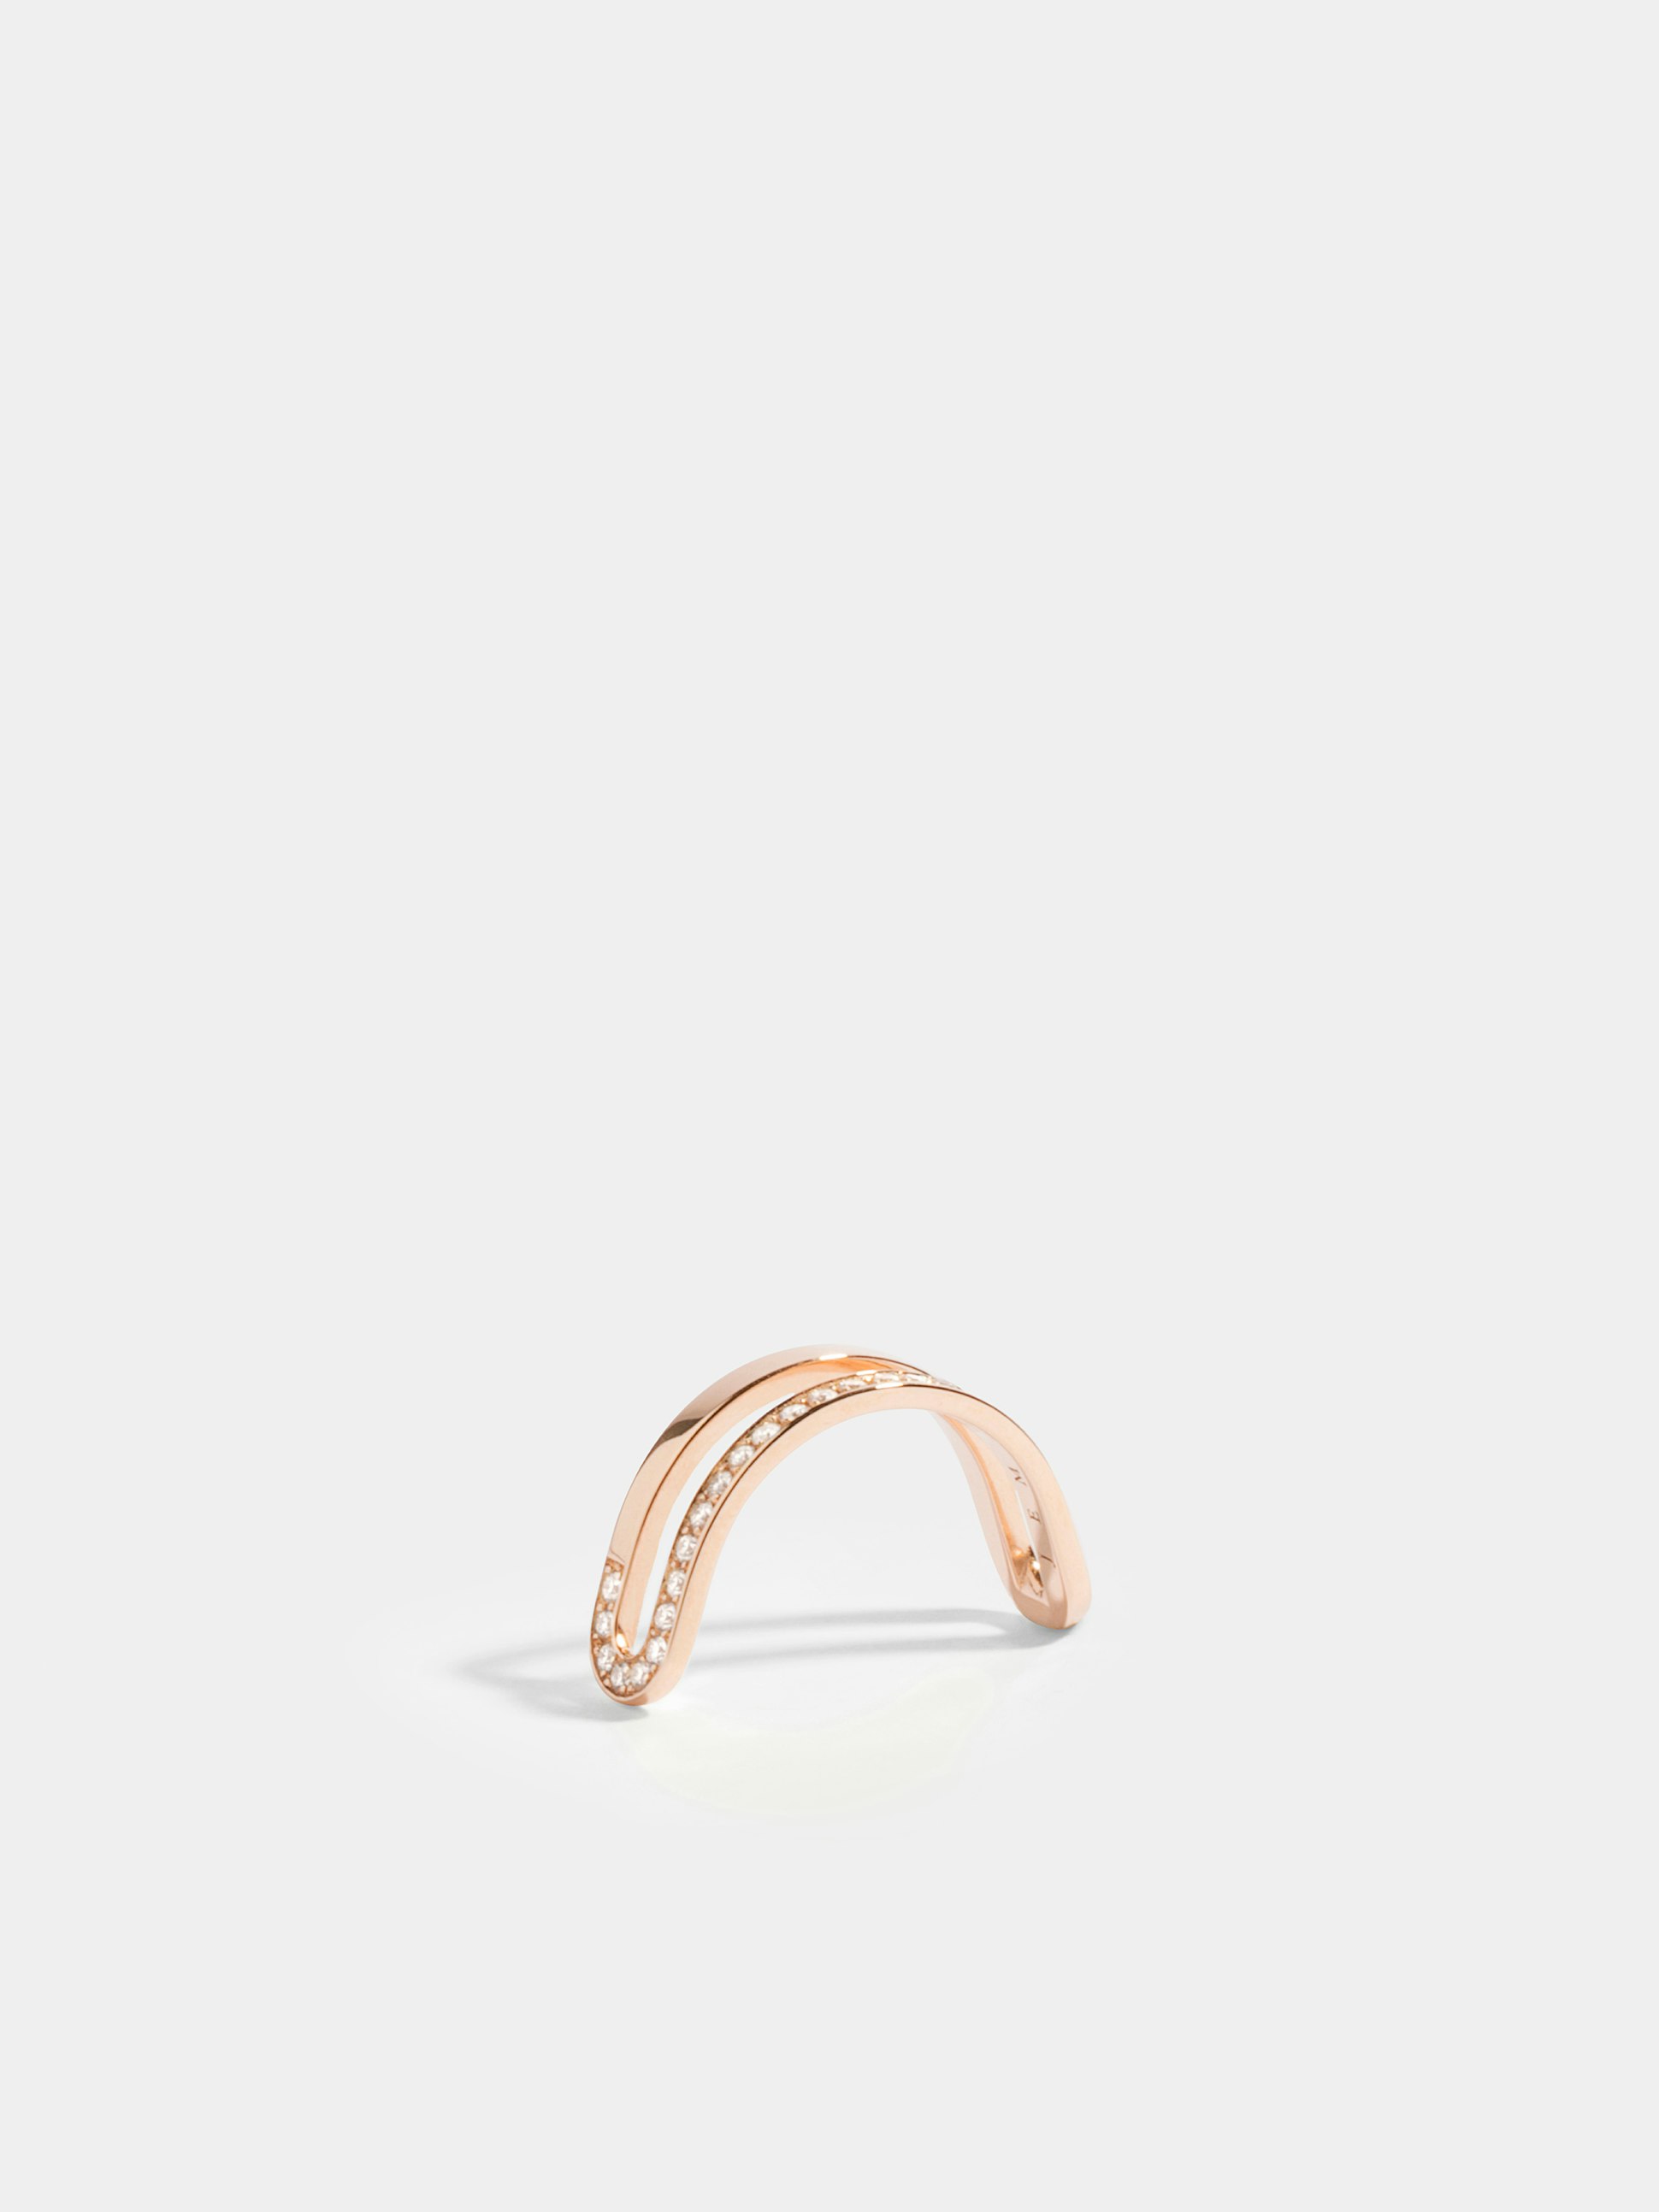 Étreintes simple half-ring in 18k Fairmined ethical rose gold, paved with lab-grown diamonds on one line.